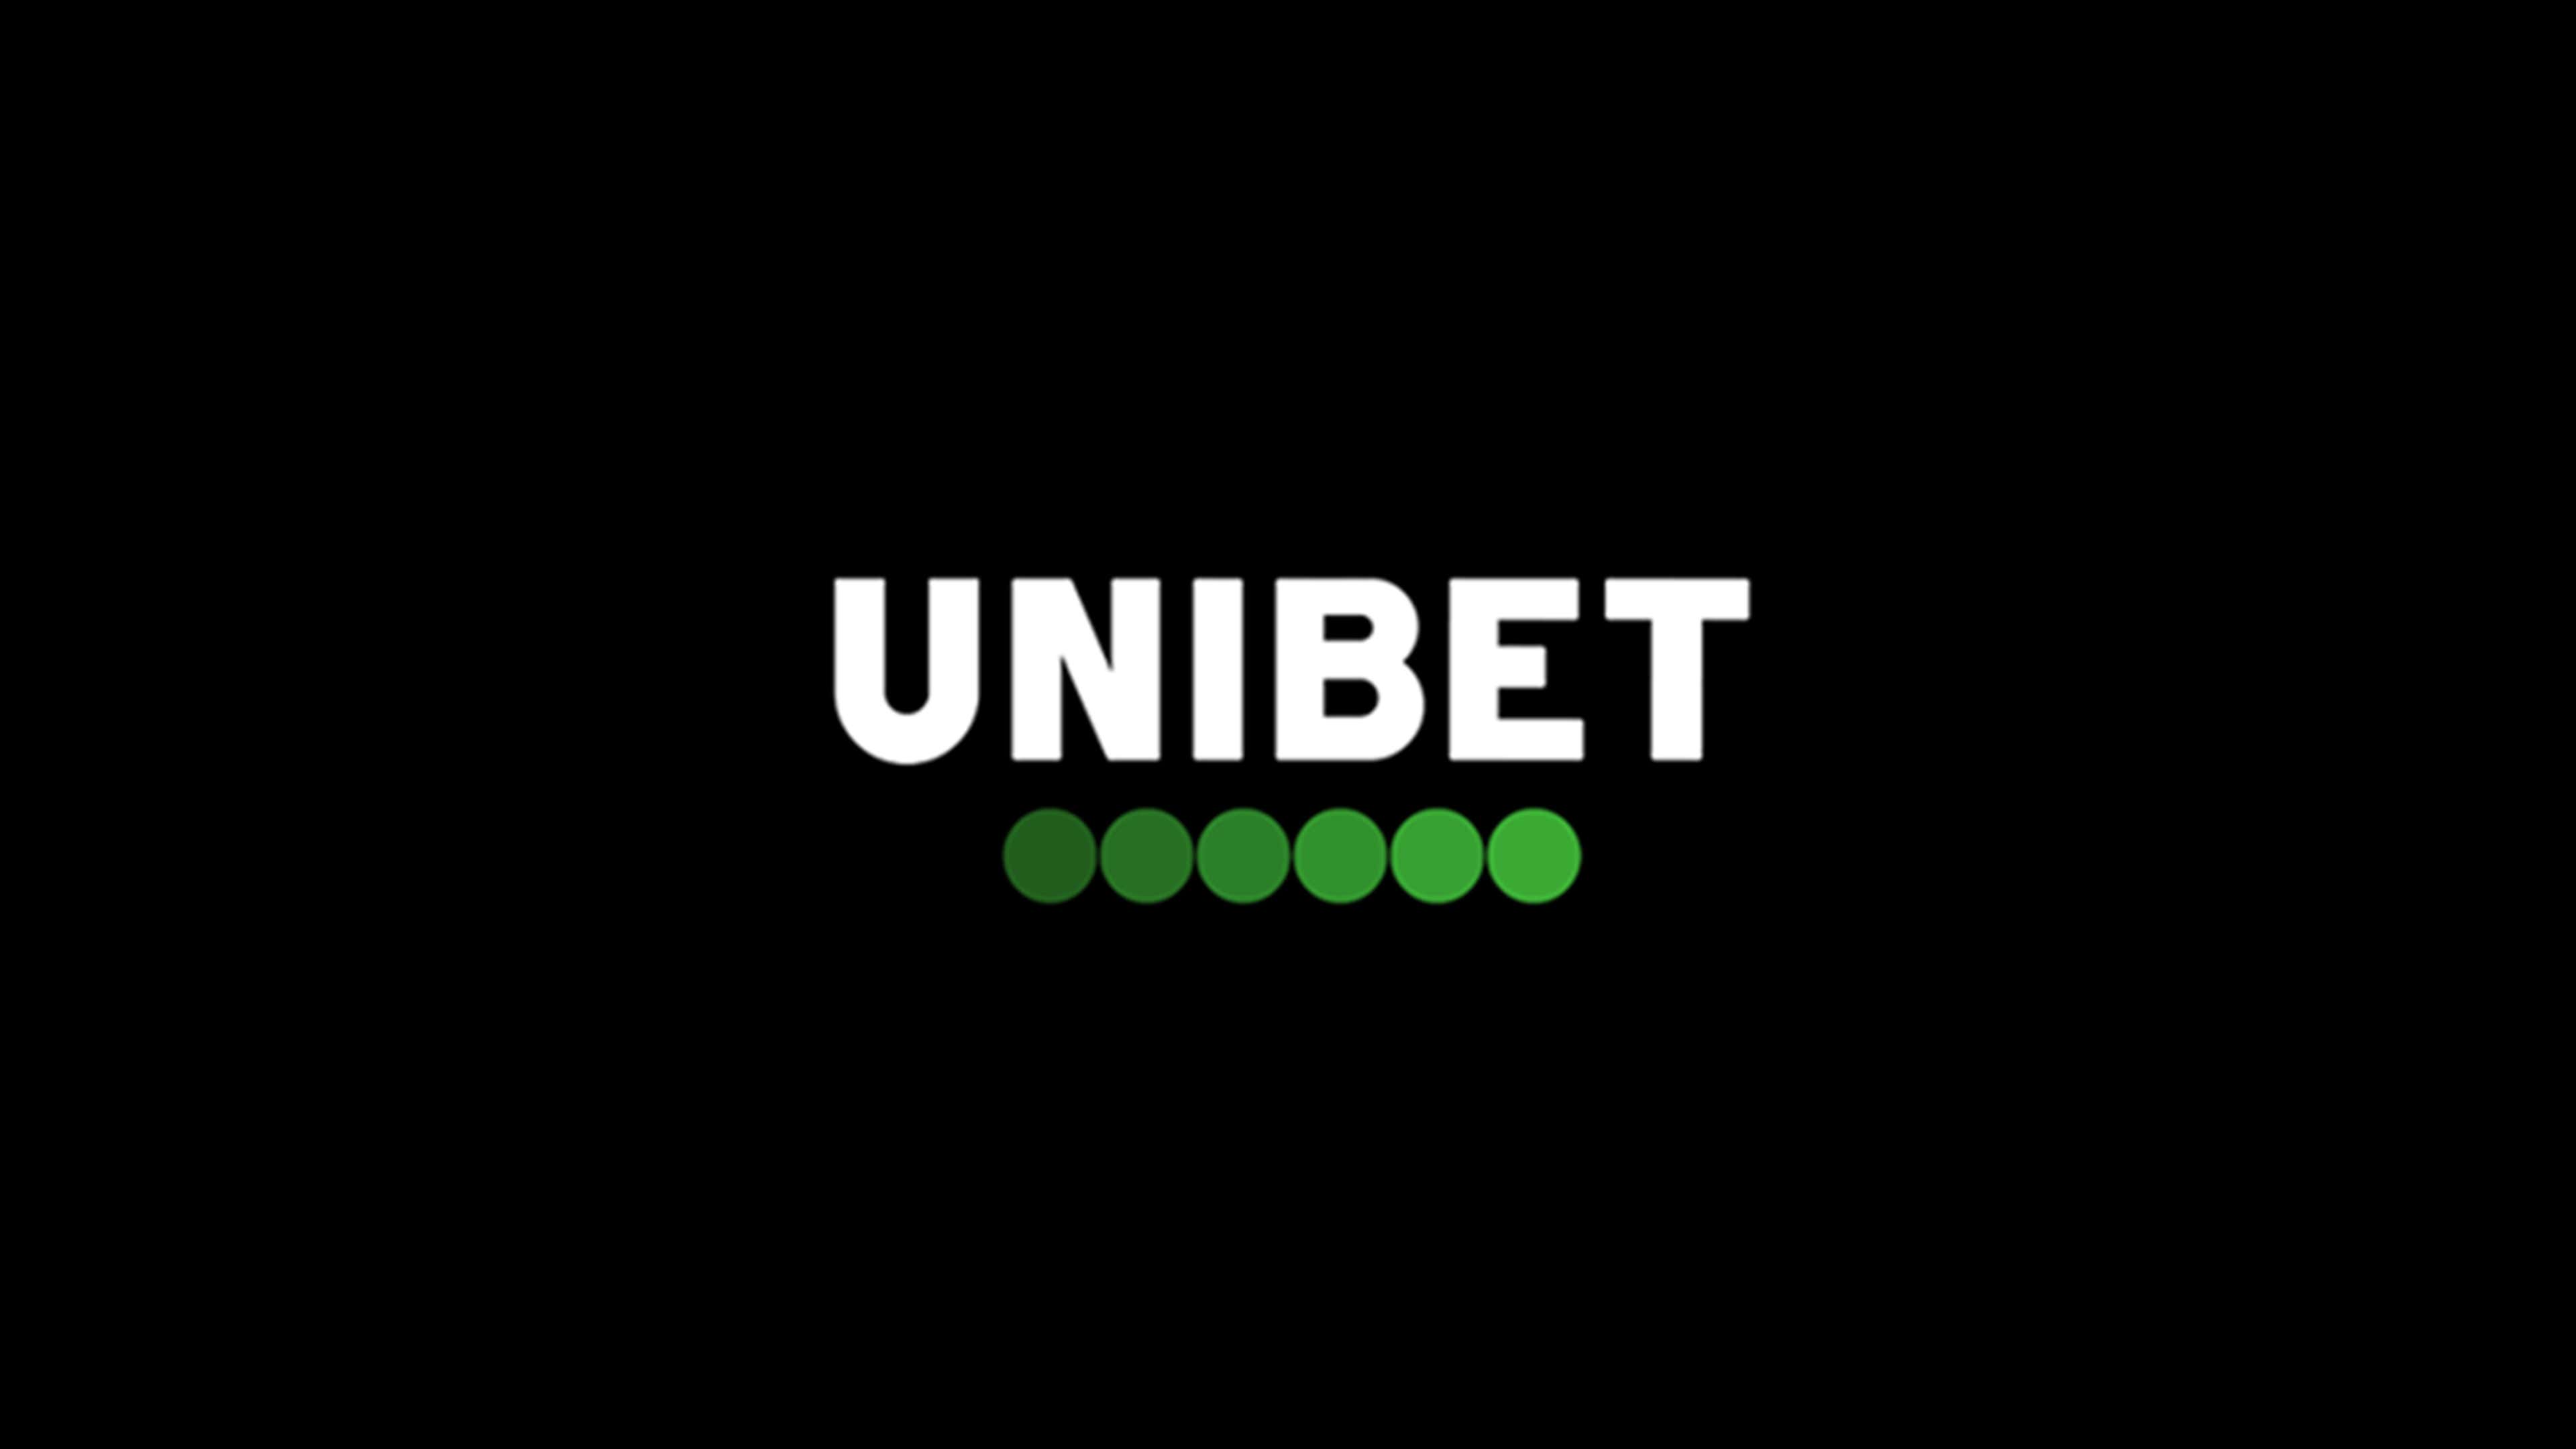 Unibet Promo Code - New Players Get Up to $500 In Bonus Bets